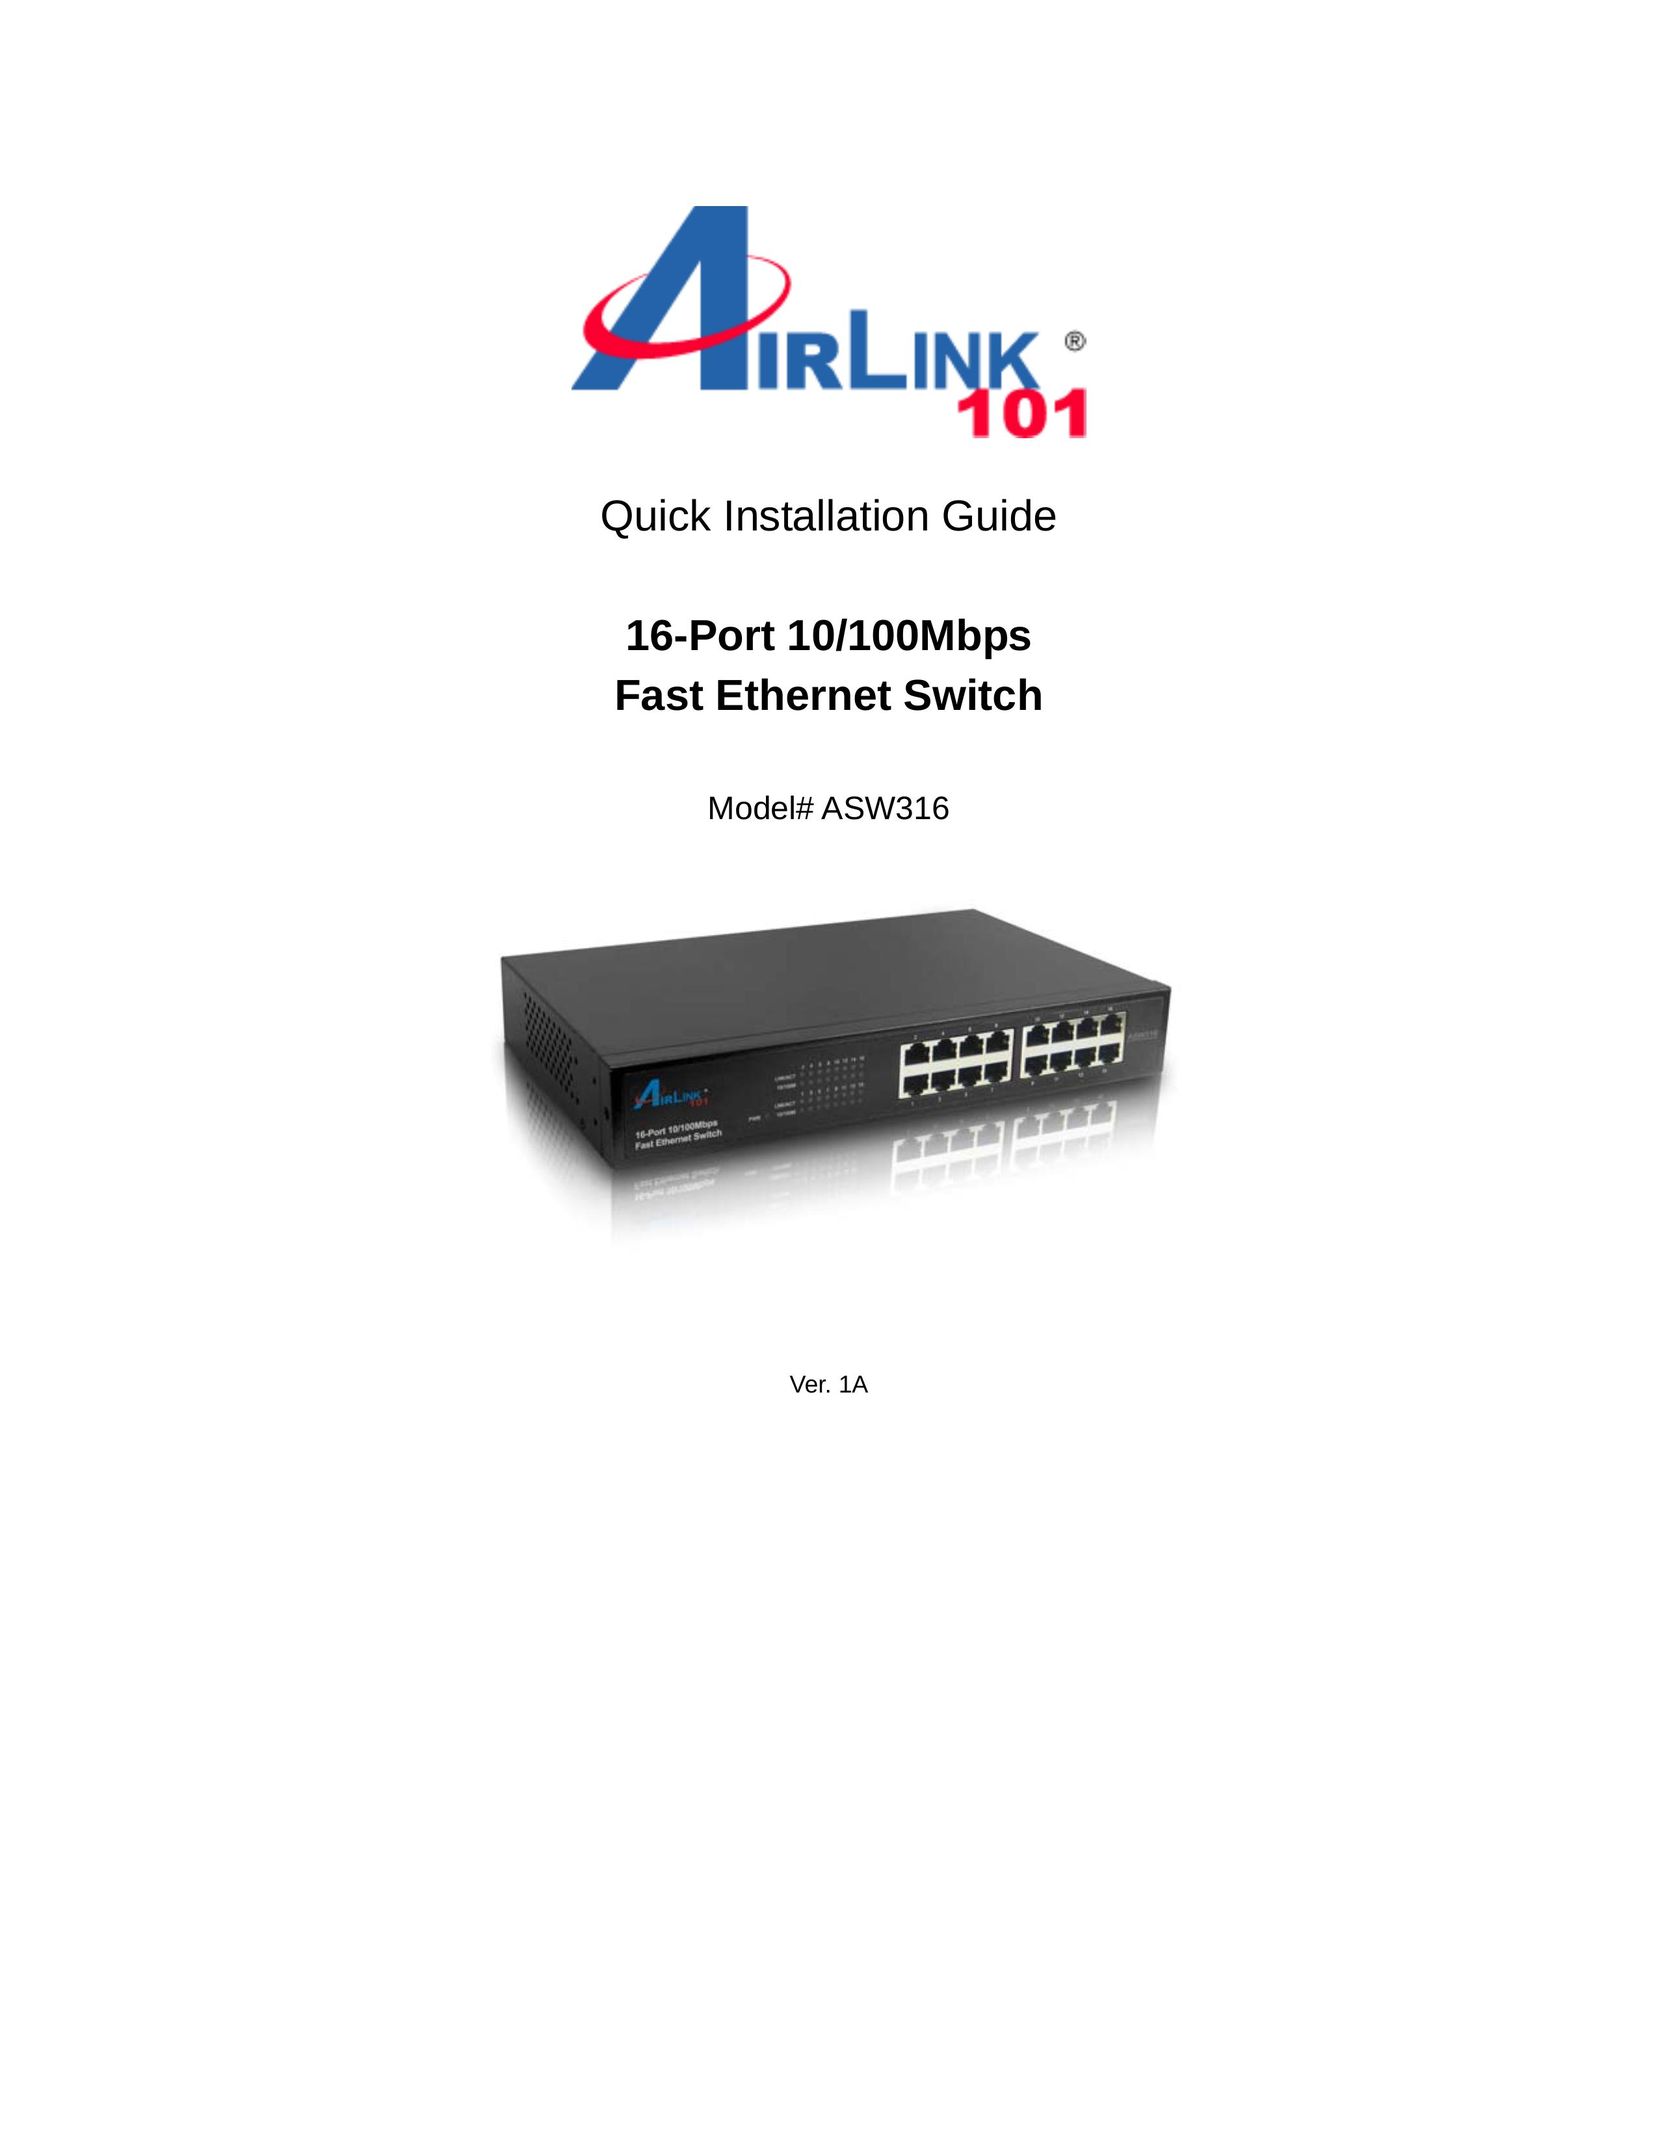 Airlink101 ASW316 Switch User Manual